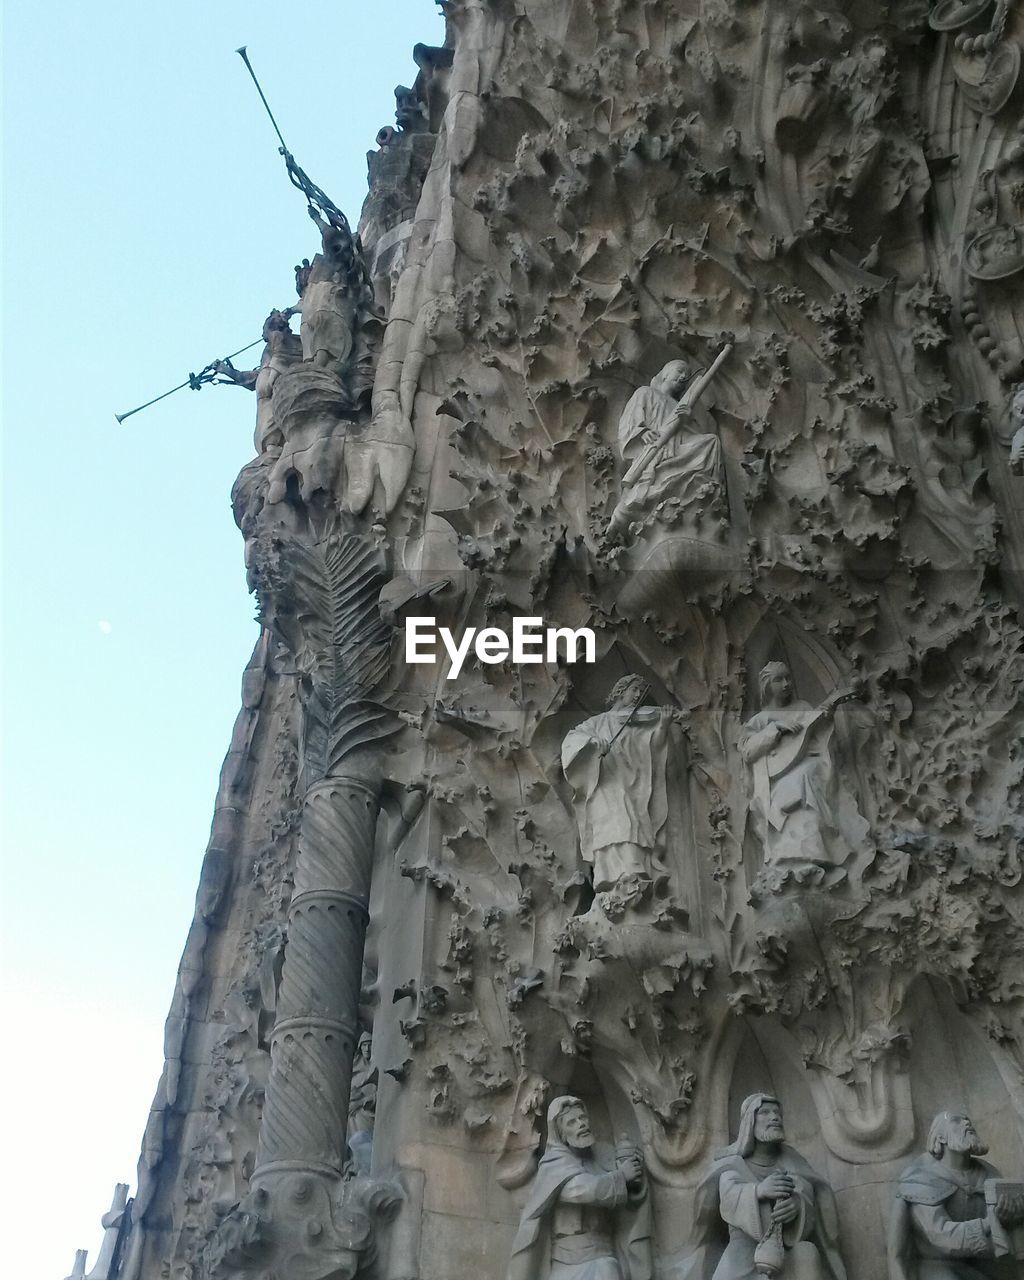 Low angle view of statue and carvings on sagrada familia